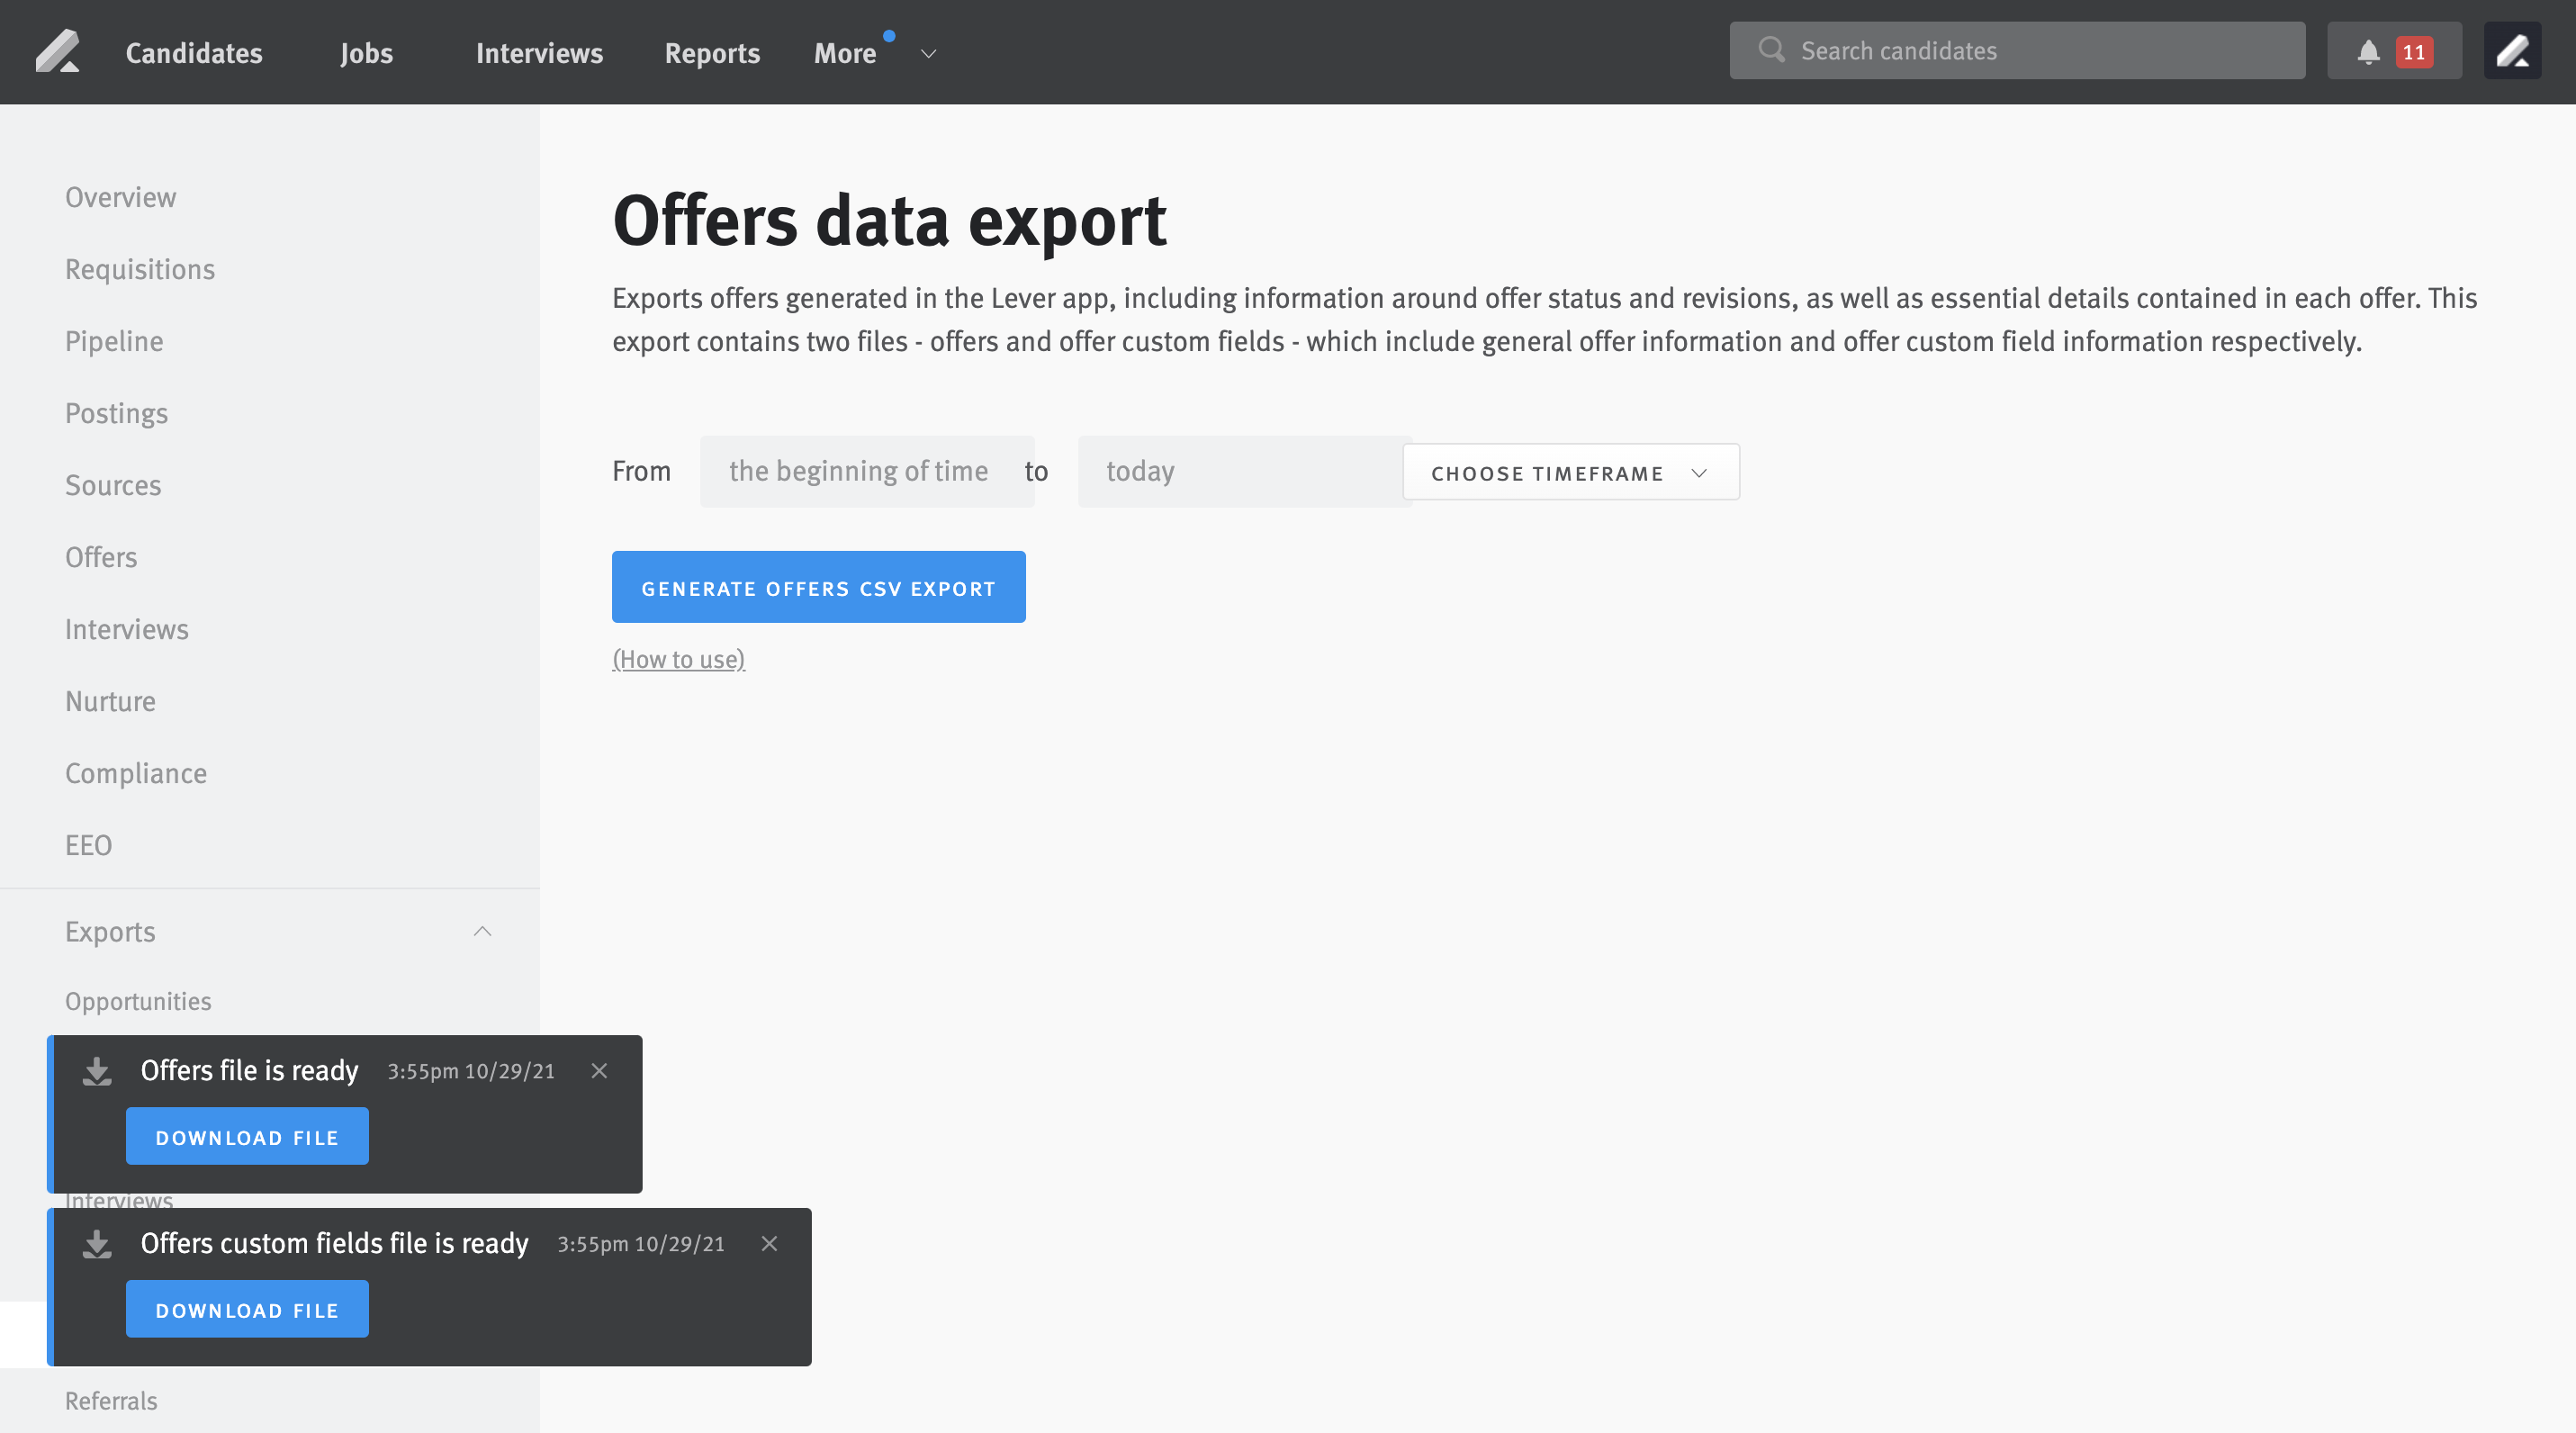 Offers data export page with pop-ups indicating the Offers file and Offers custom fields file is ready for download.